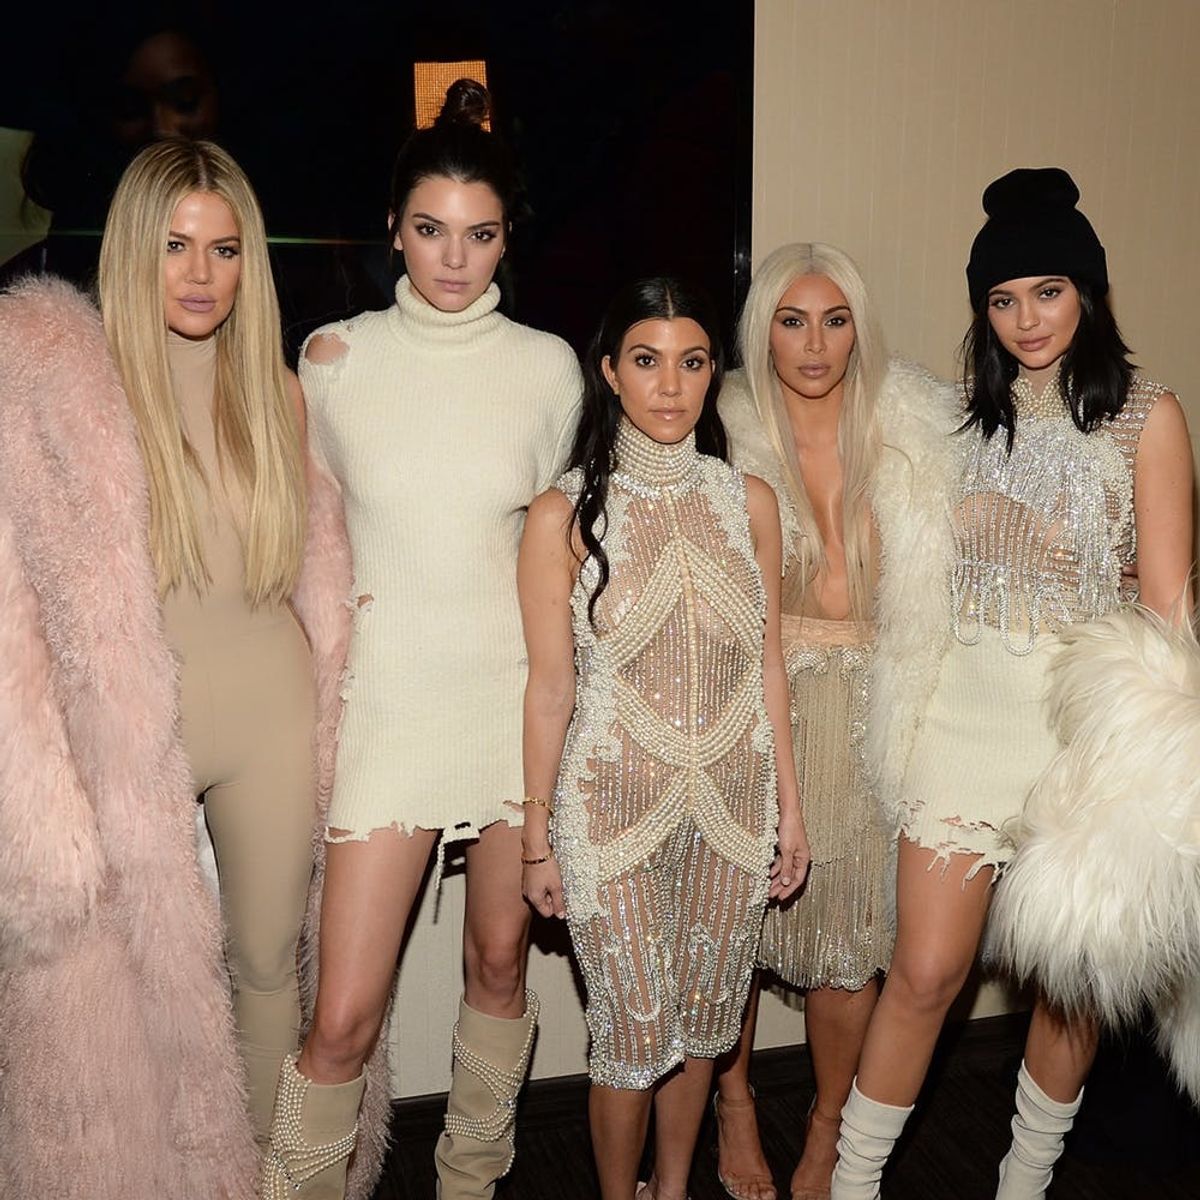 Kylie Jenner Is Missing from the Kardashian Family Christmas Card and Fans Are Not Happy